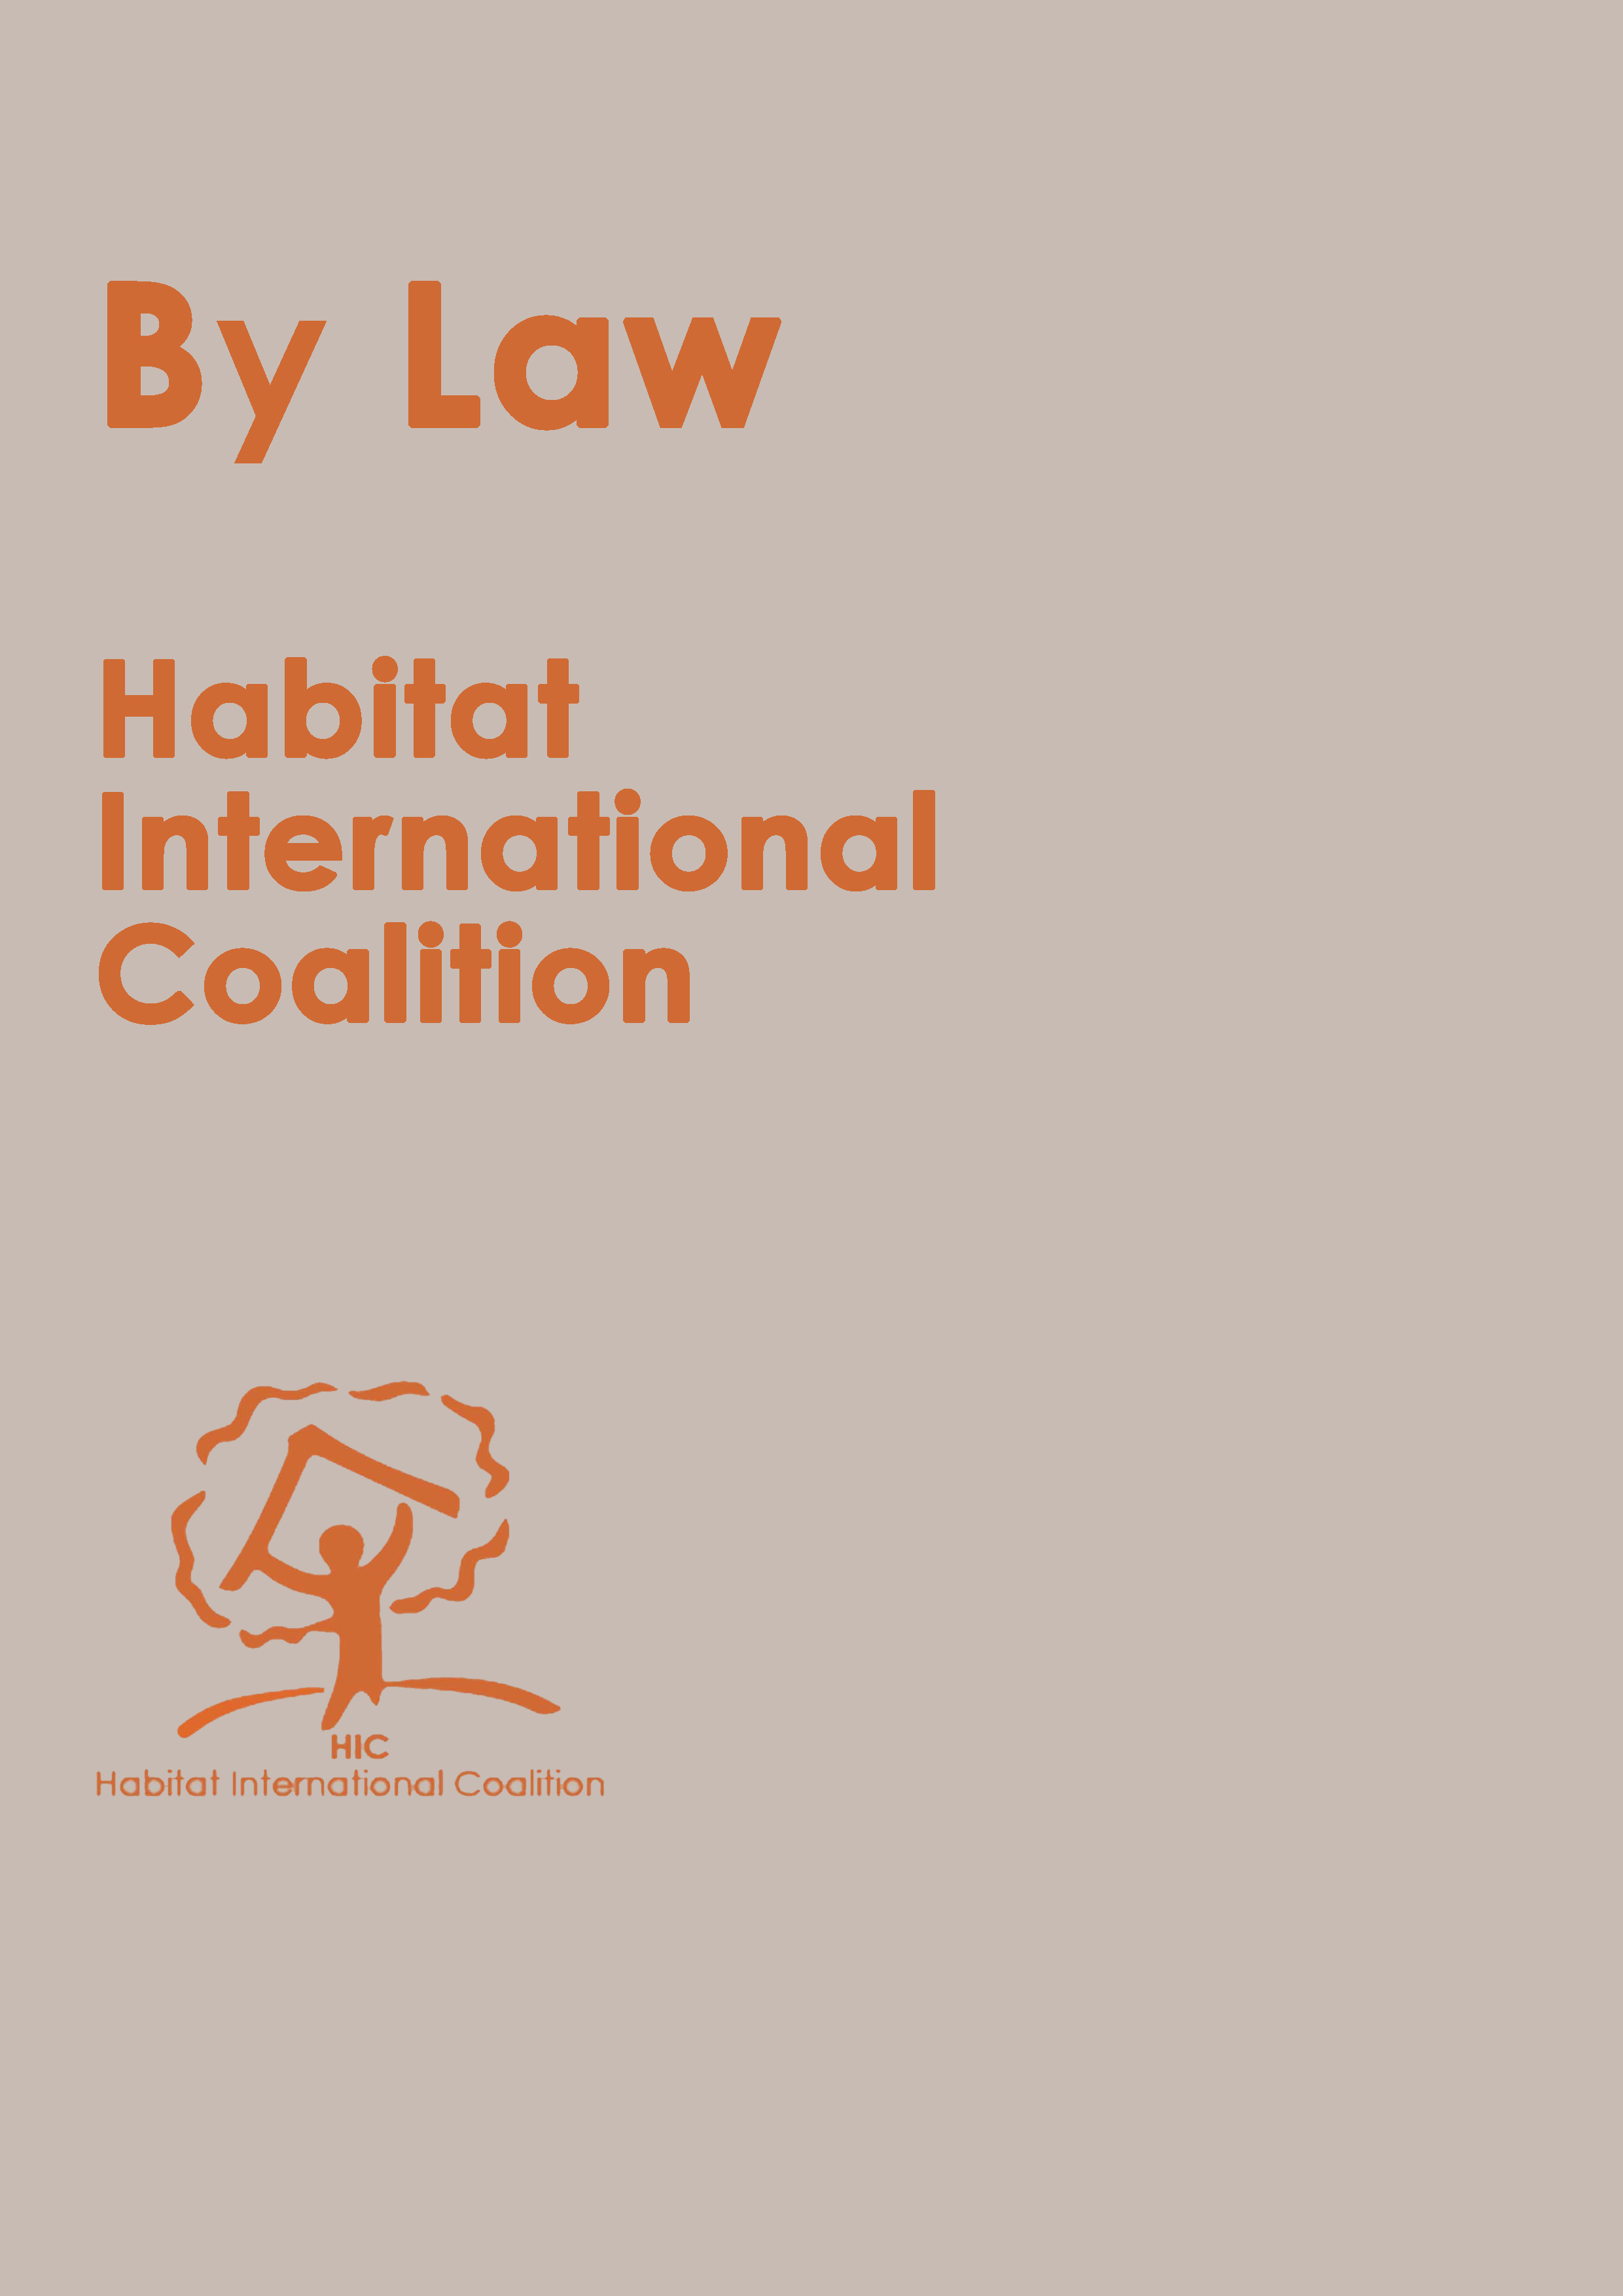 Habitat International Coalition (HIC) By Law – First part